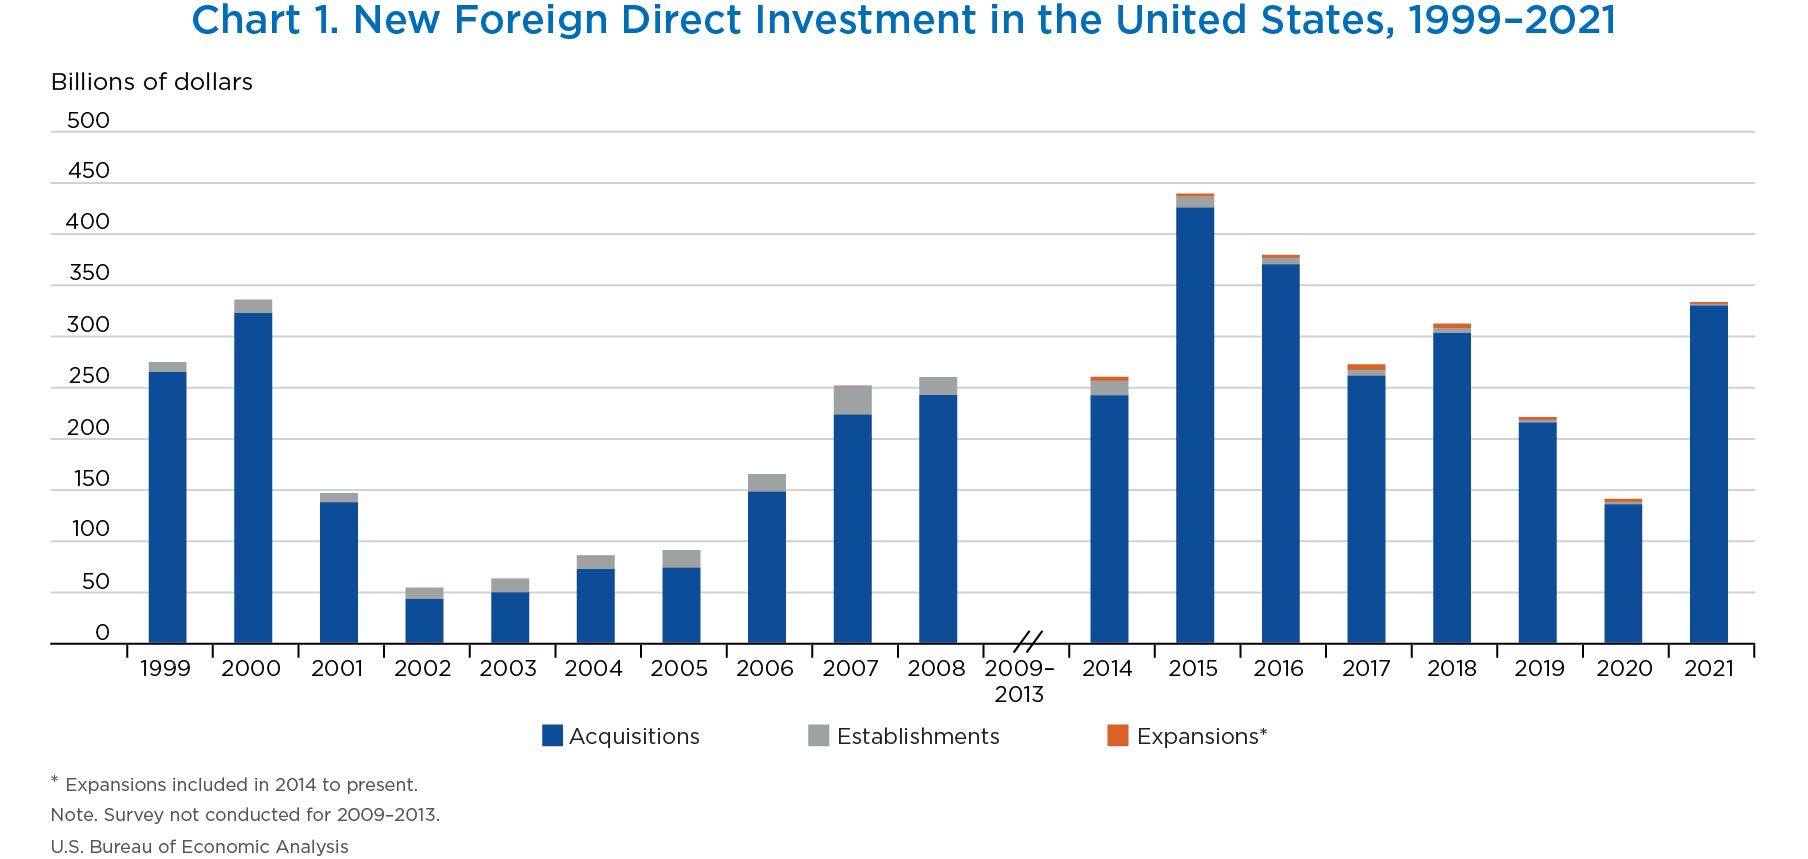 de sneeuw Gewend gek SCB, New Foreign Direct Investment in the United States in 2021, August 2022